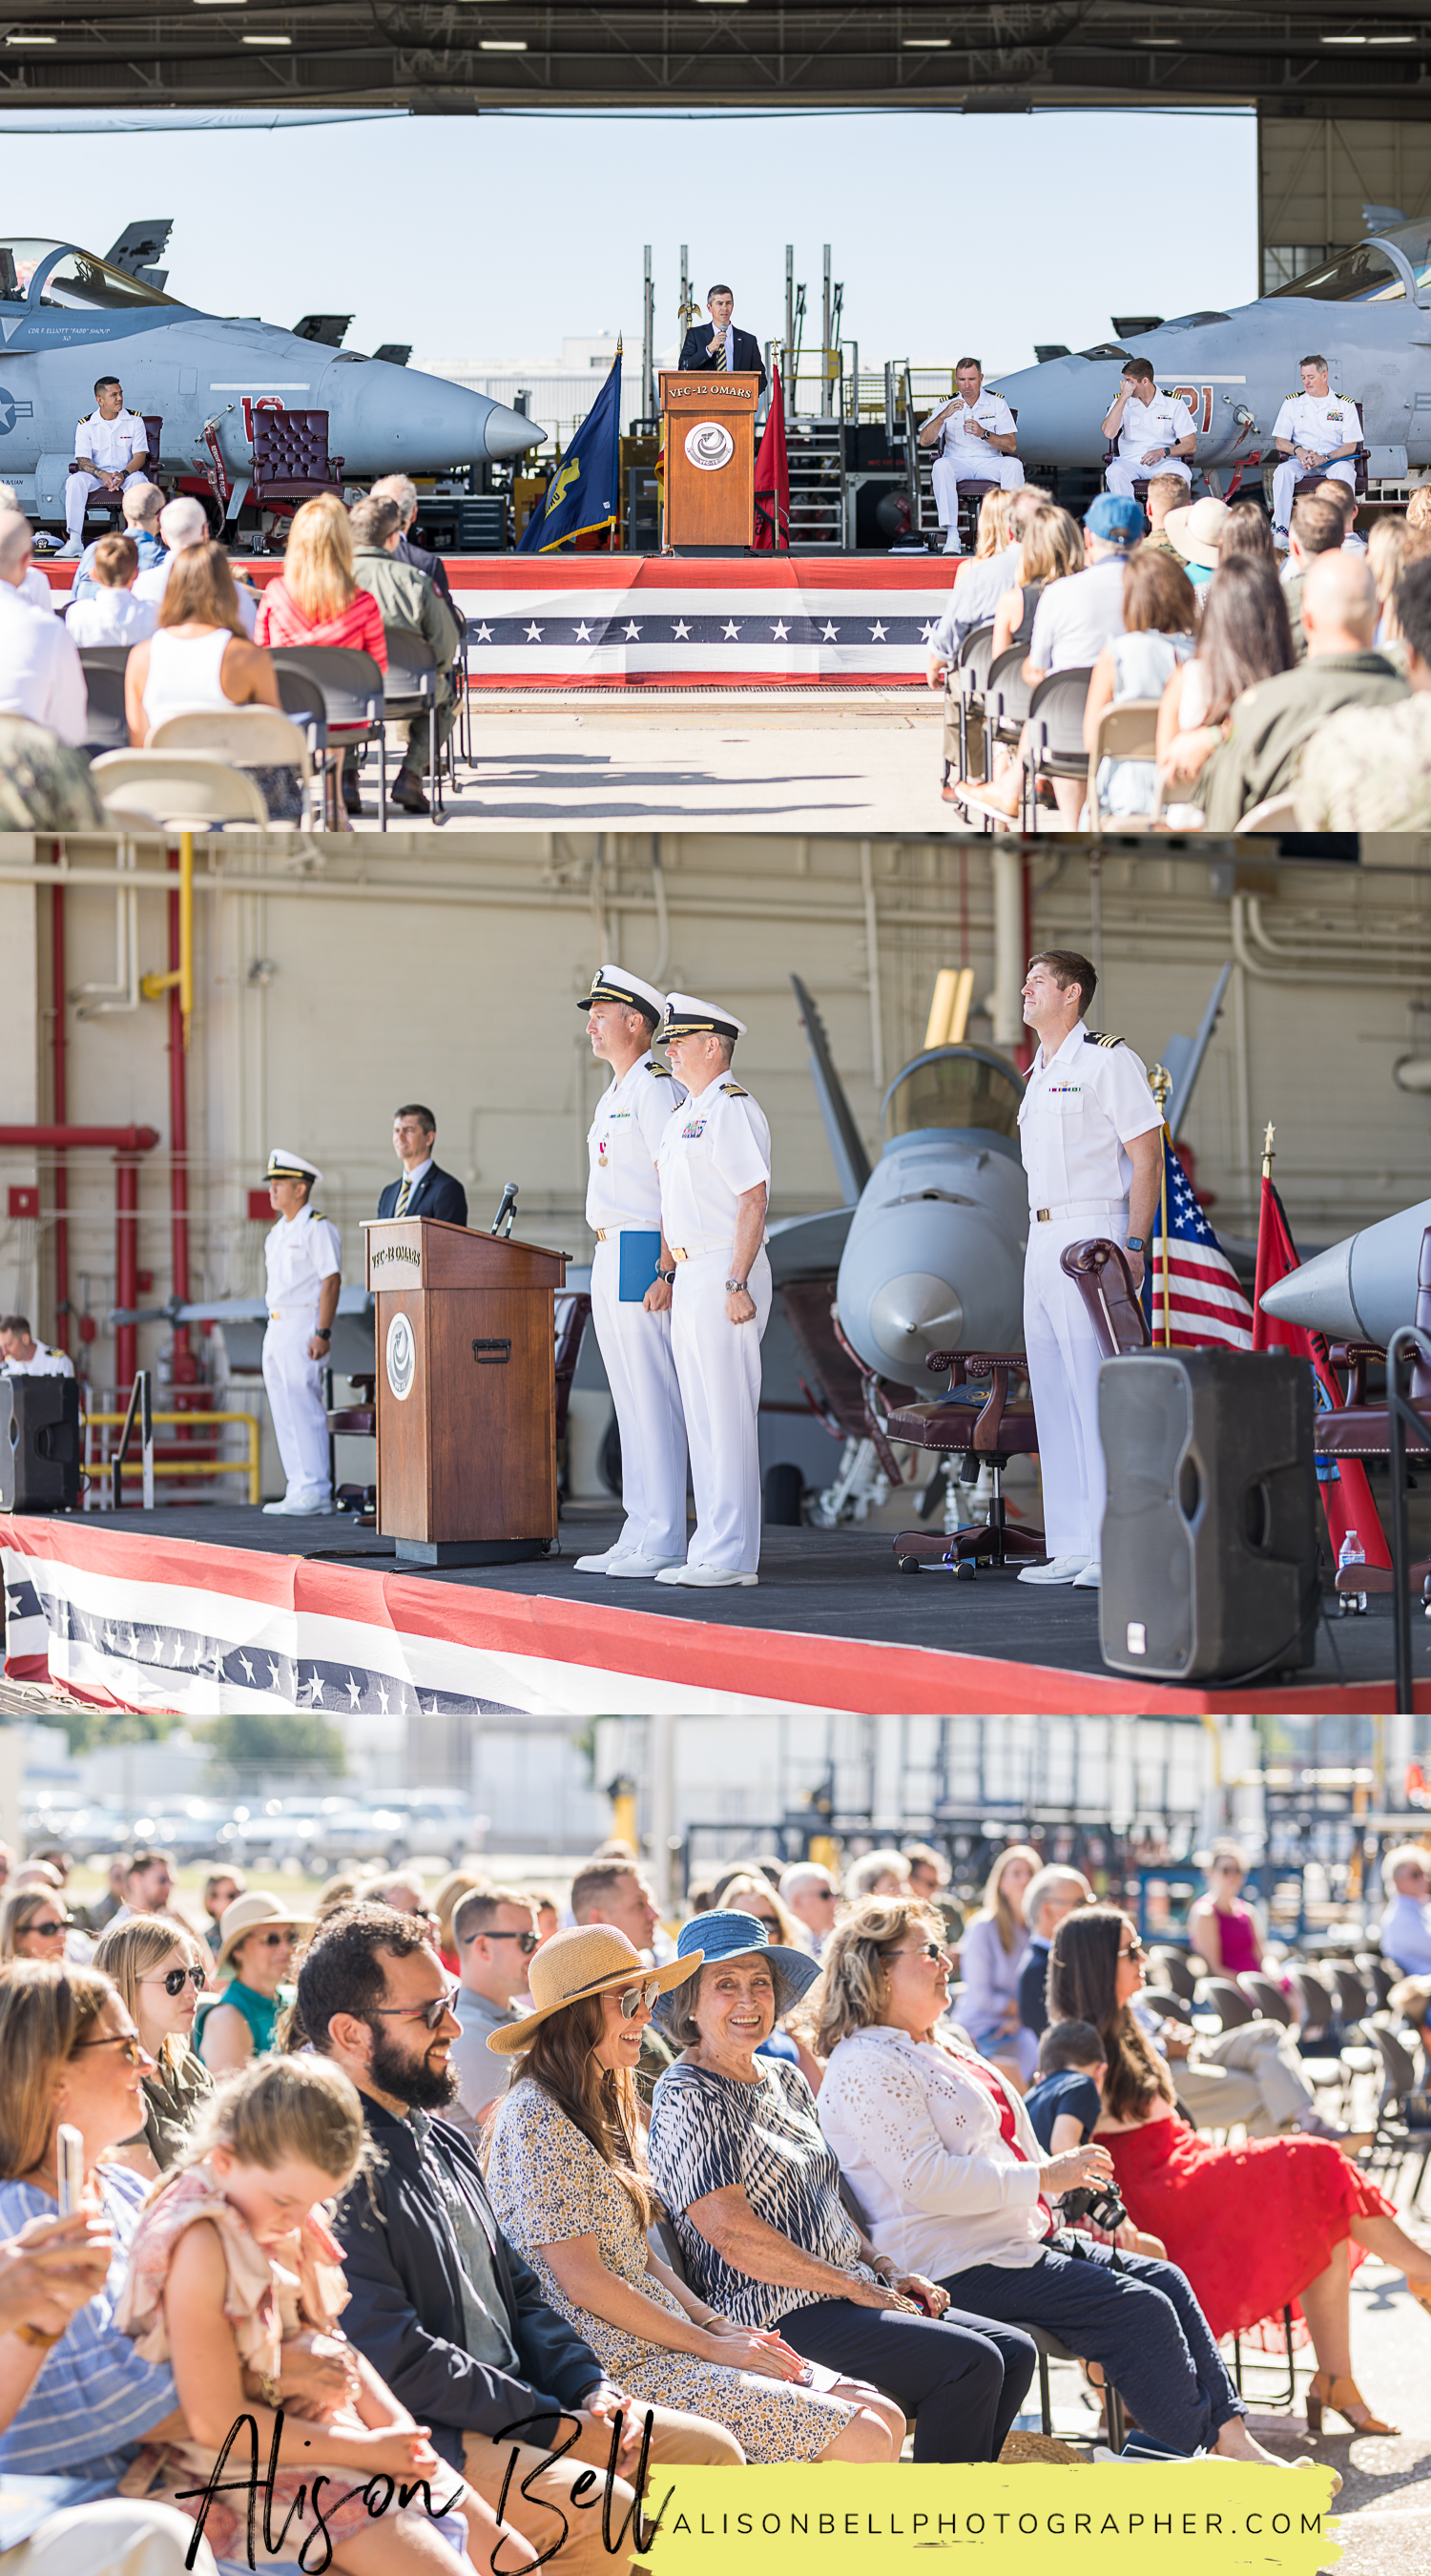 Navy change of command ceremony in a hangar at Naval Air Station Oceana in Virginia Beach, VA 